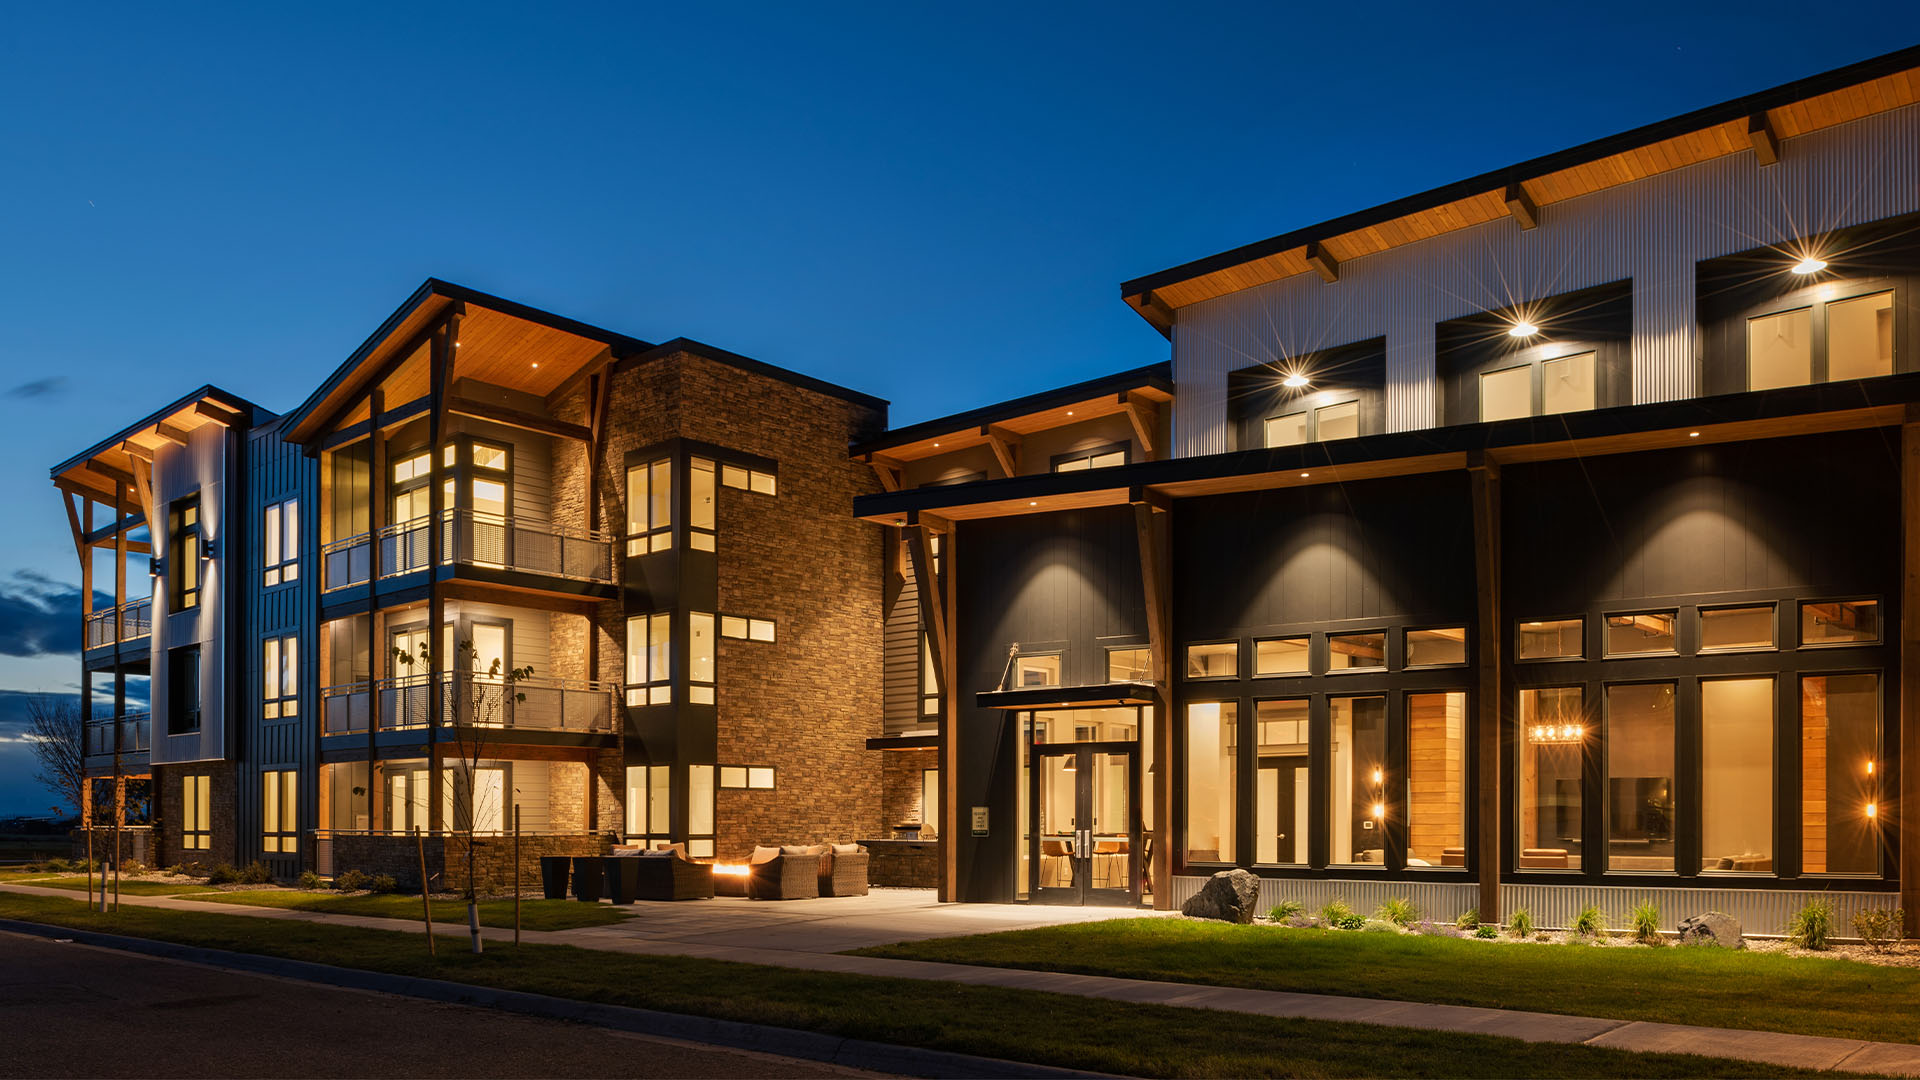 penrose apartment complexes in bozeman mt